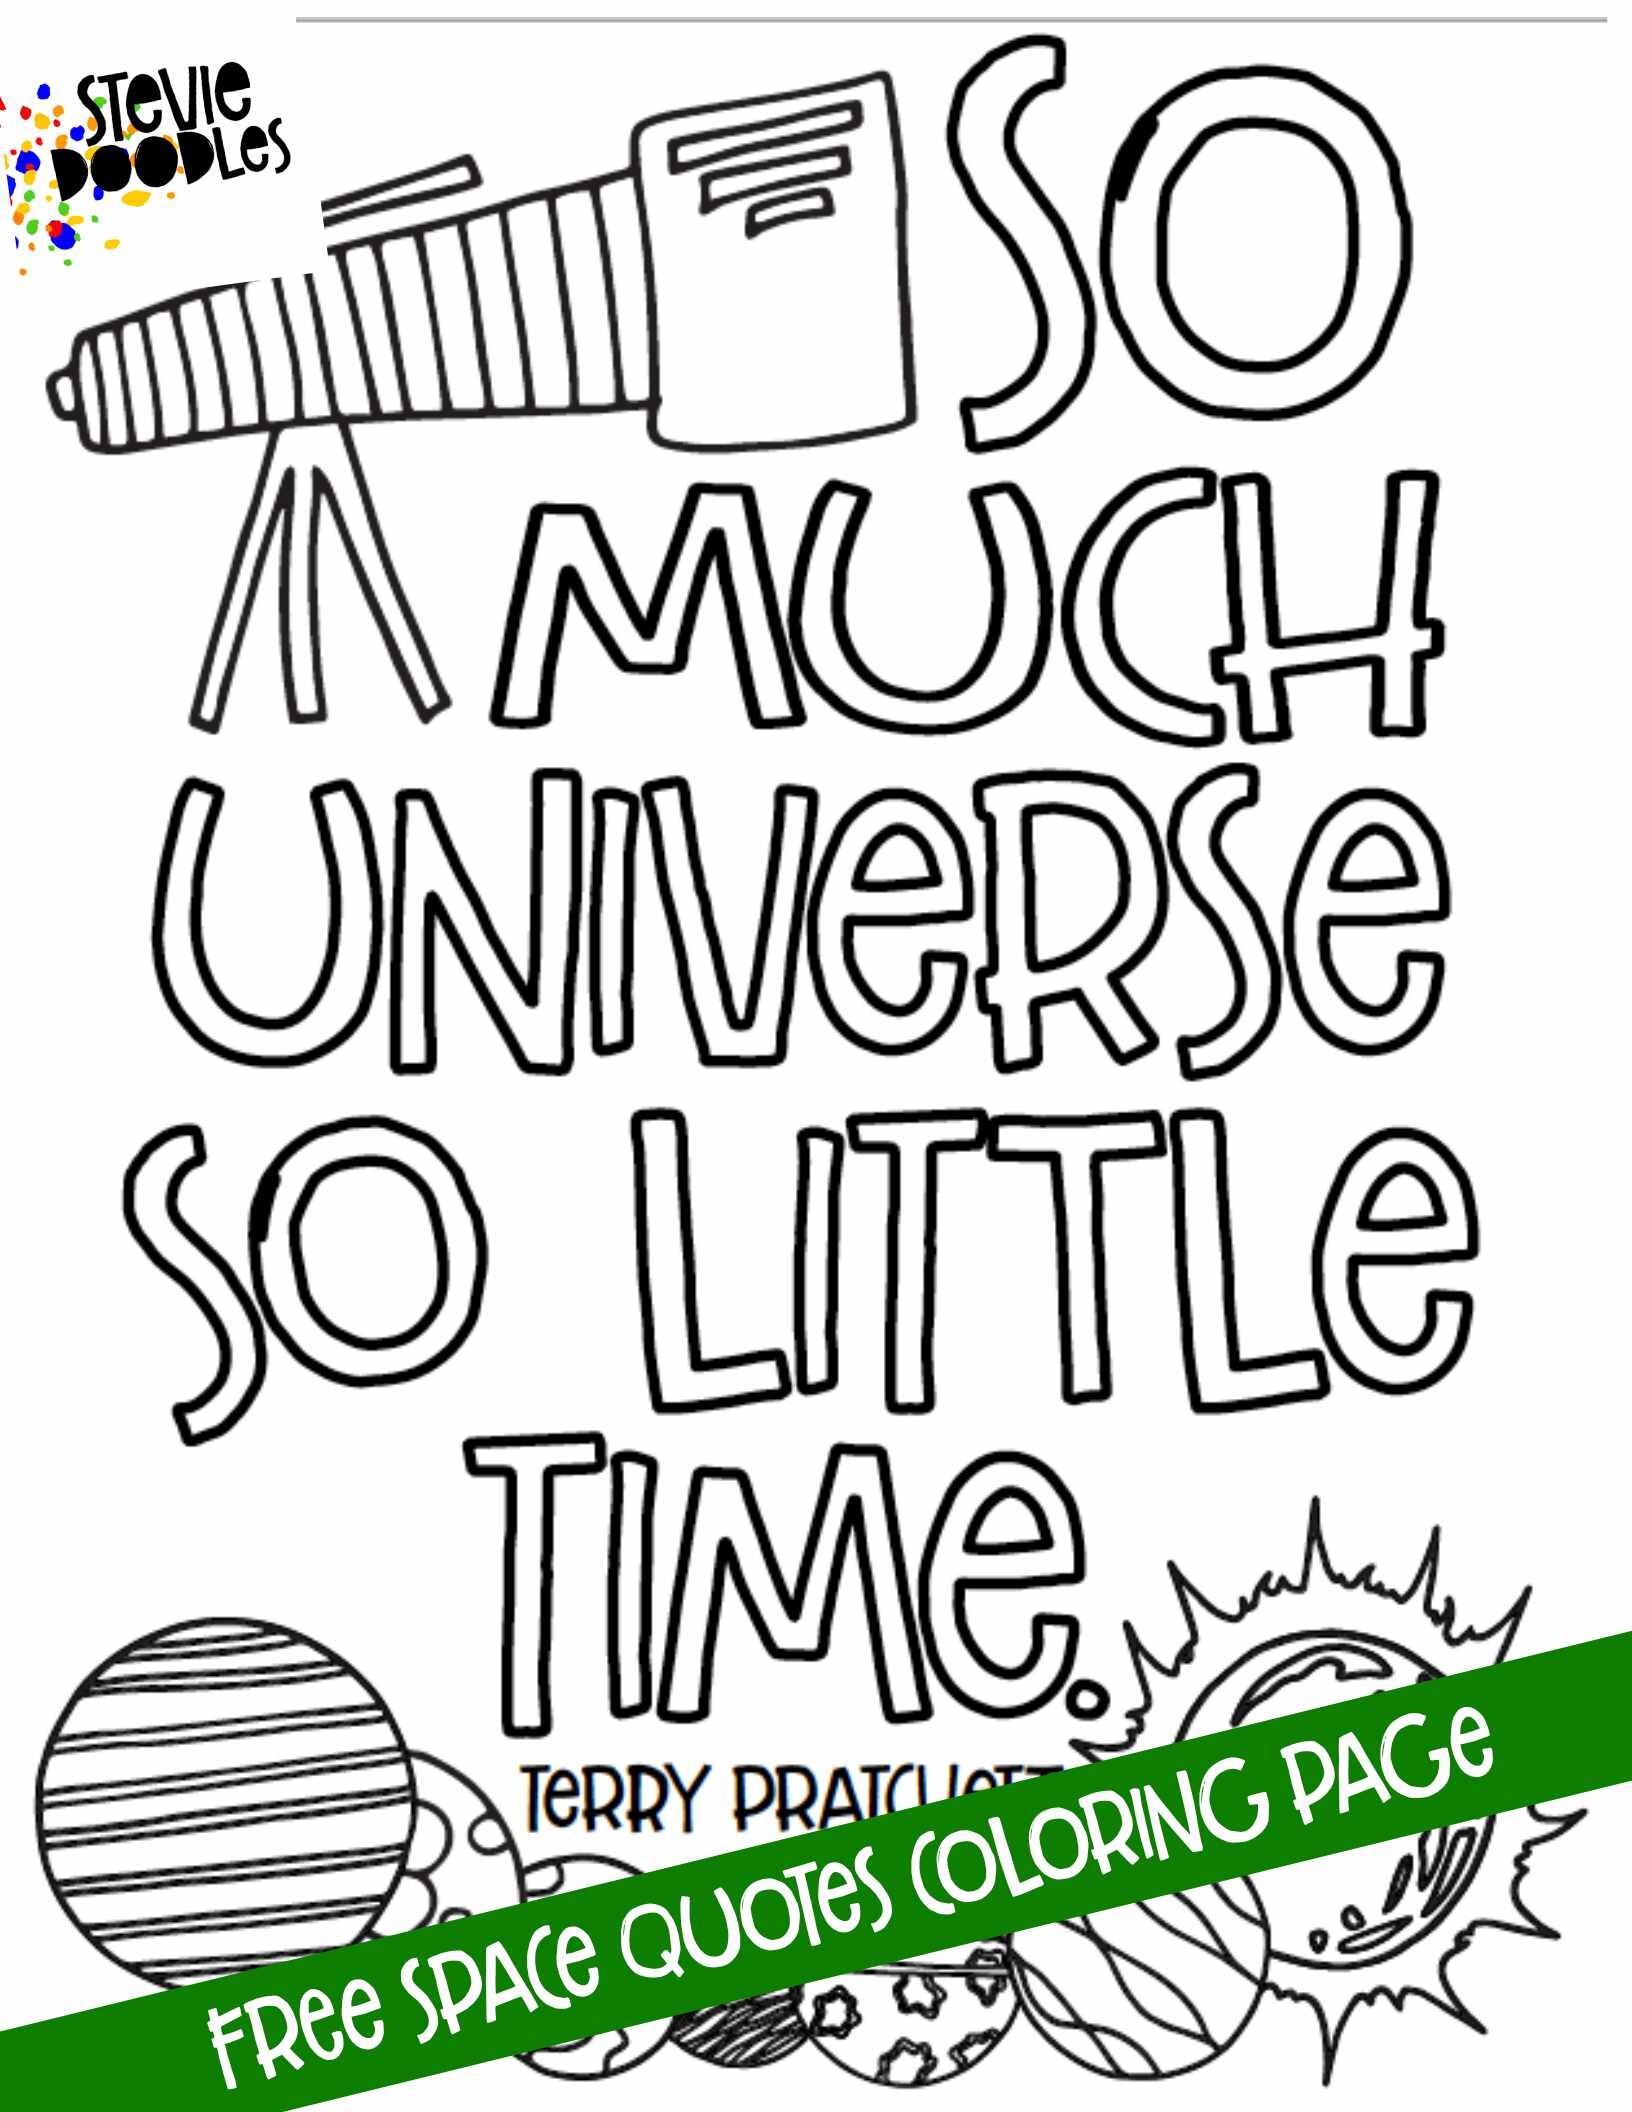 Free! A space quote by Terry Pratchett as a free page to print and color from Stevie Doodles